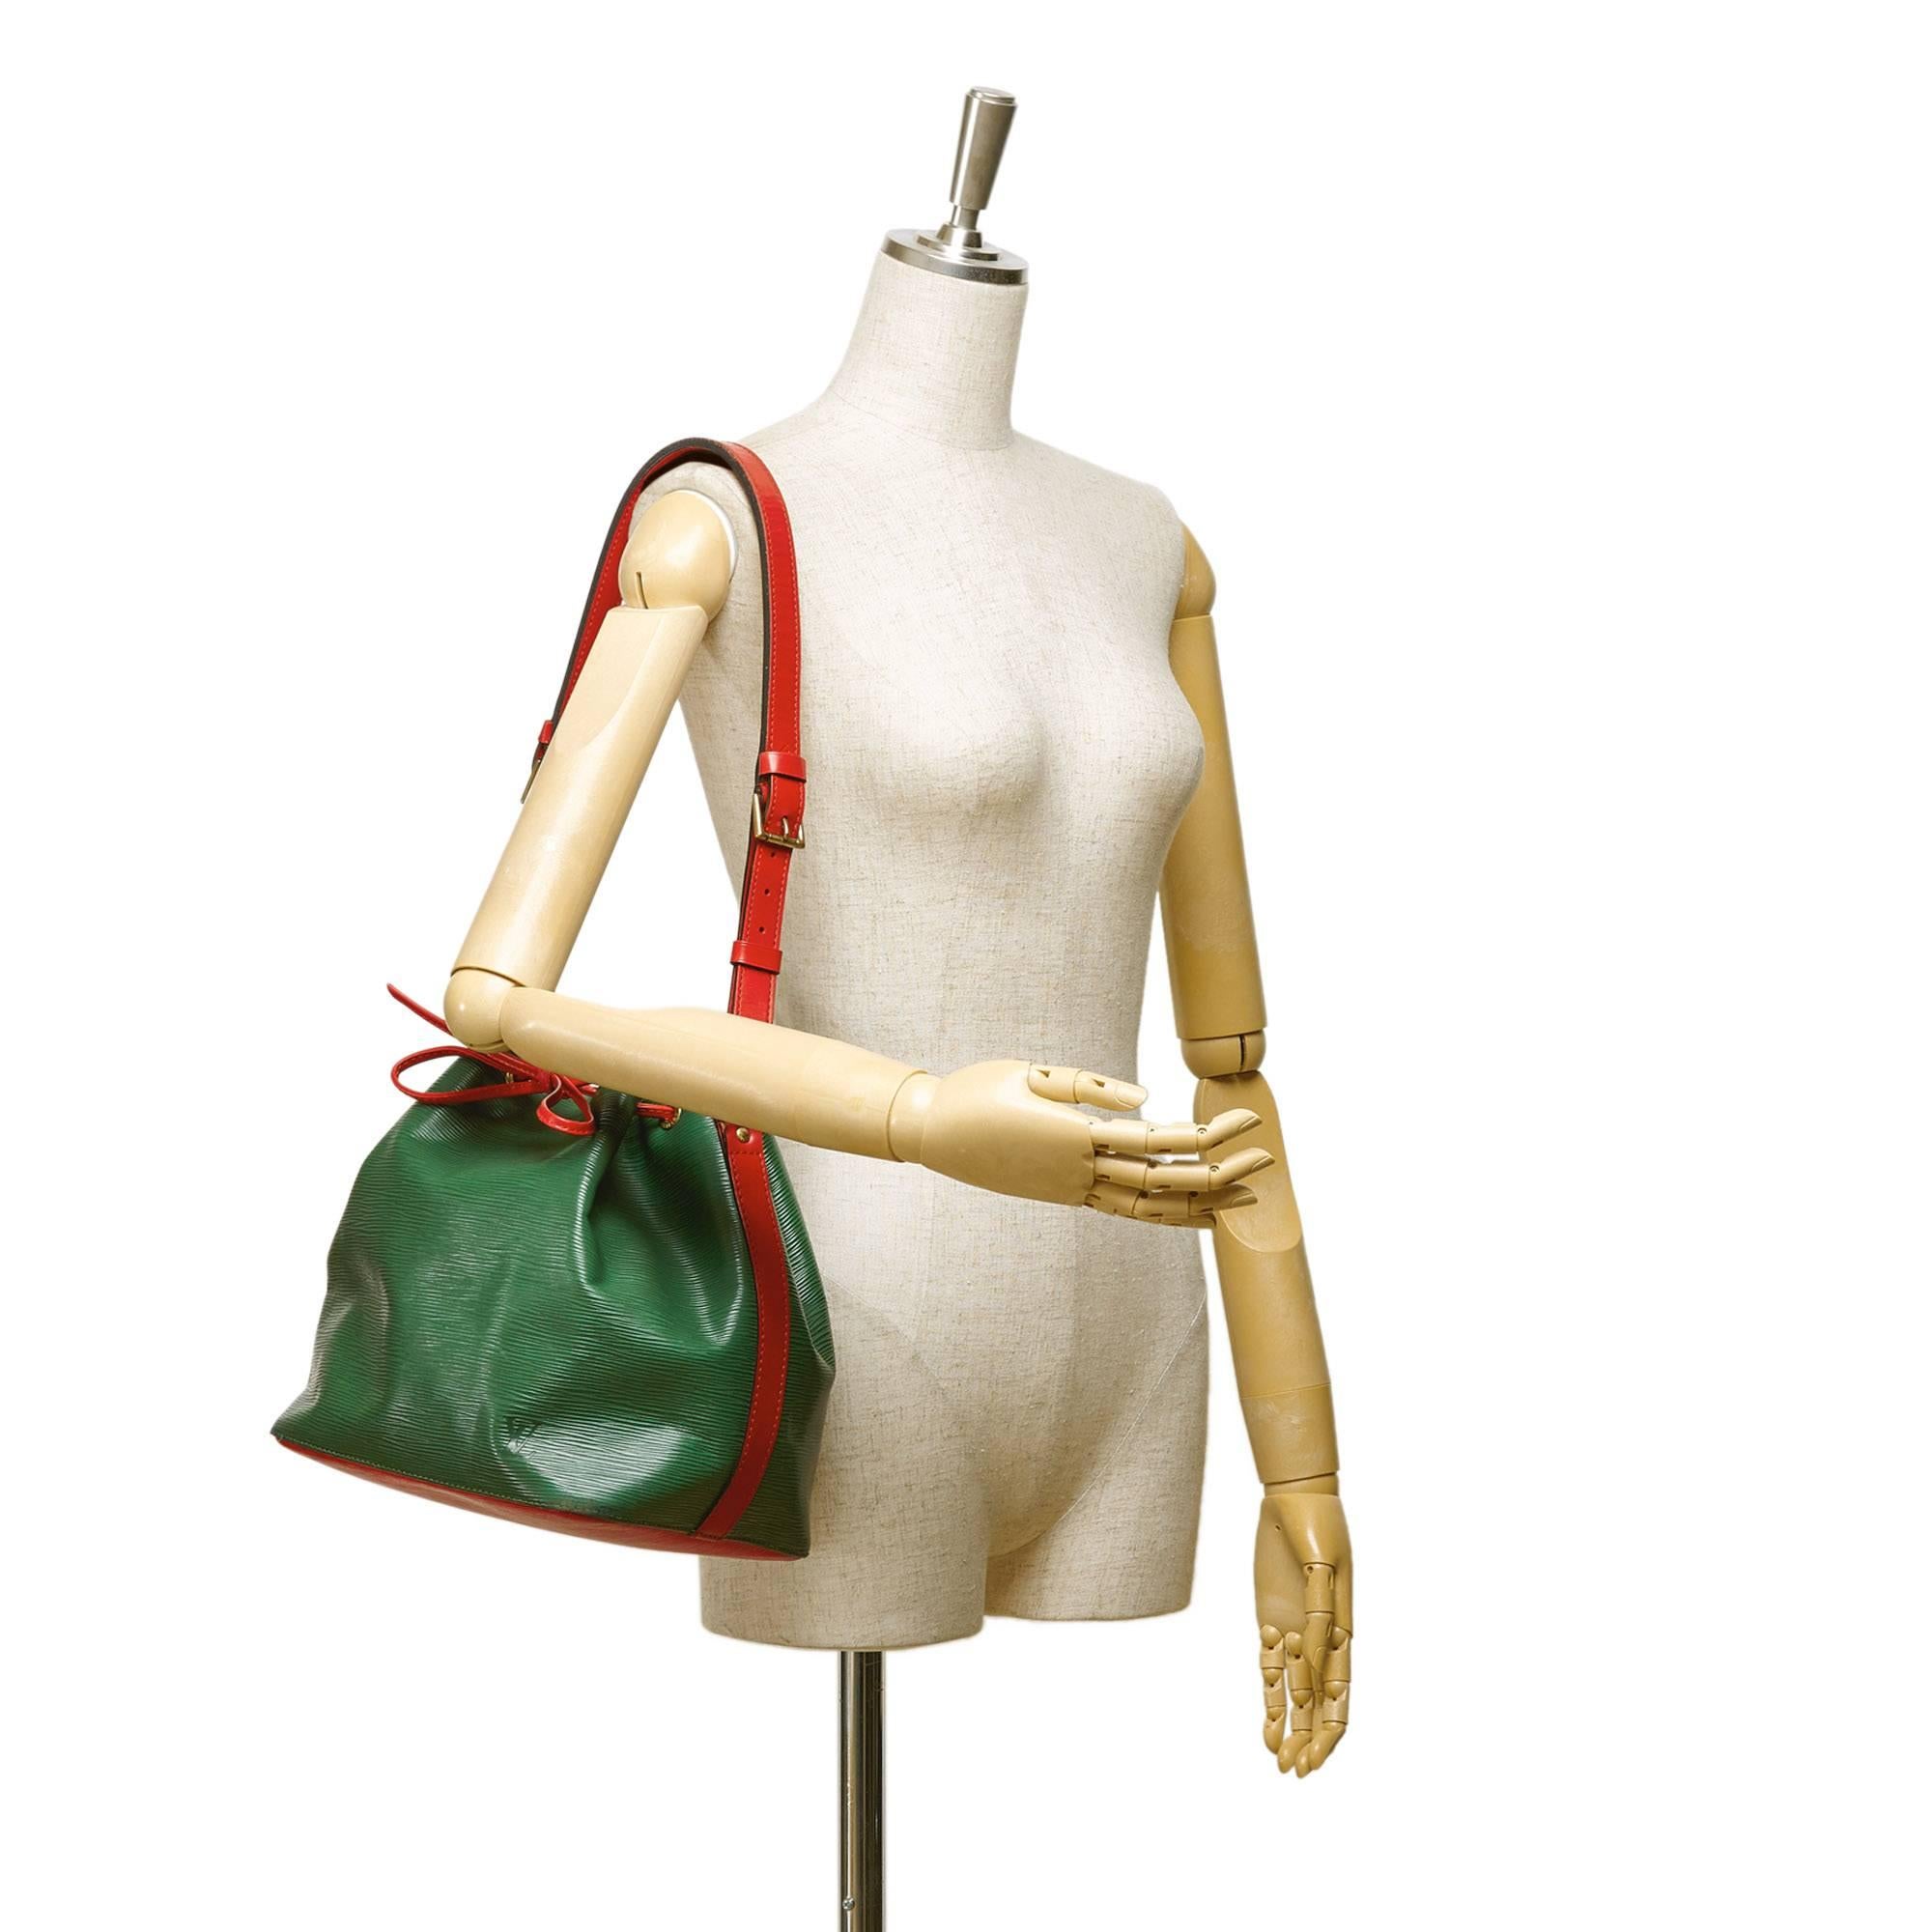 - This vintage 1994 Louis Vuitton petit noe features a green and red epi leather, an adjustable flat strap, an open top with a drawstring closure, and Alcantara lining. Rare and interesting colour combination Louis Vuitton shoulder bag!

- Made in